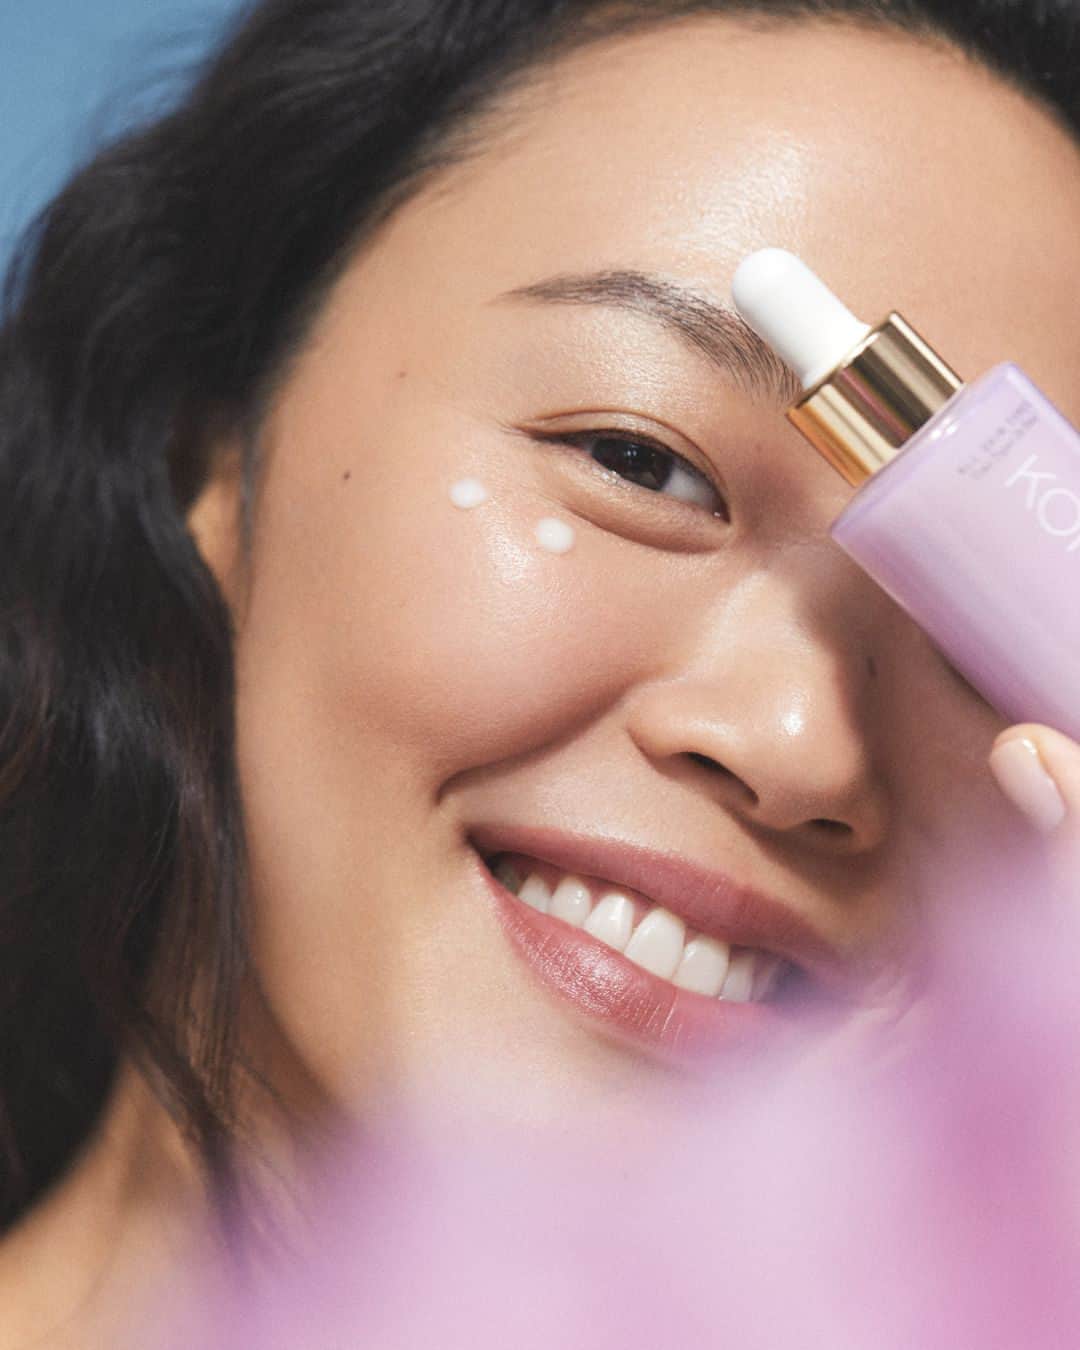 KORA Organicsのインスタグラム：「It's no secret why our Plant Stem Cell Retinol Alternative Serum keeps selling out...   💜 Contains 5x the active power of retinol  💜 Smooths fine lines & wrinkles  💜 Prevents future signs of aging caused by environmental stressors​ 💜 Provides a mega dose of antioxidants to nourish + protect 💜 Gentle enough to use morning and night, without irritation   Get yours before we sell out—again.」